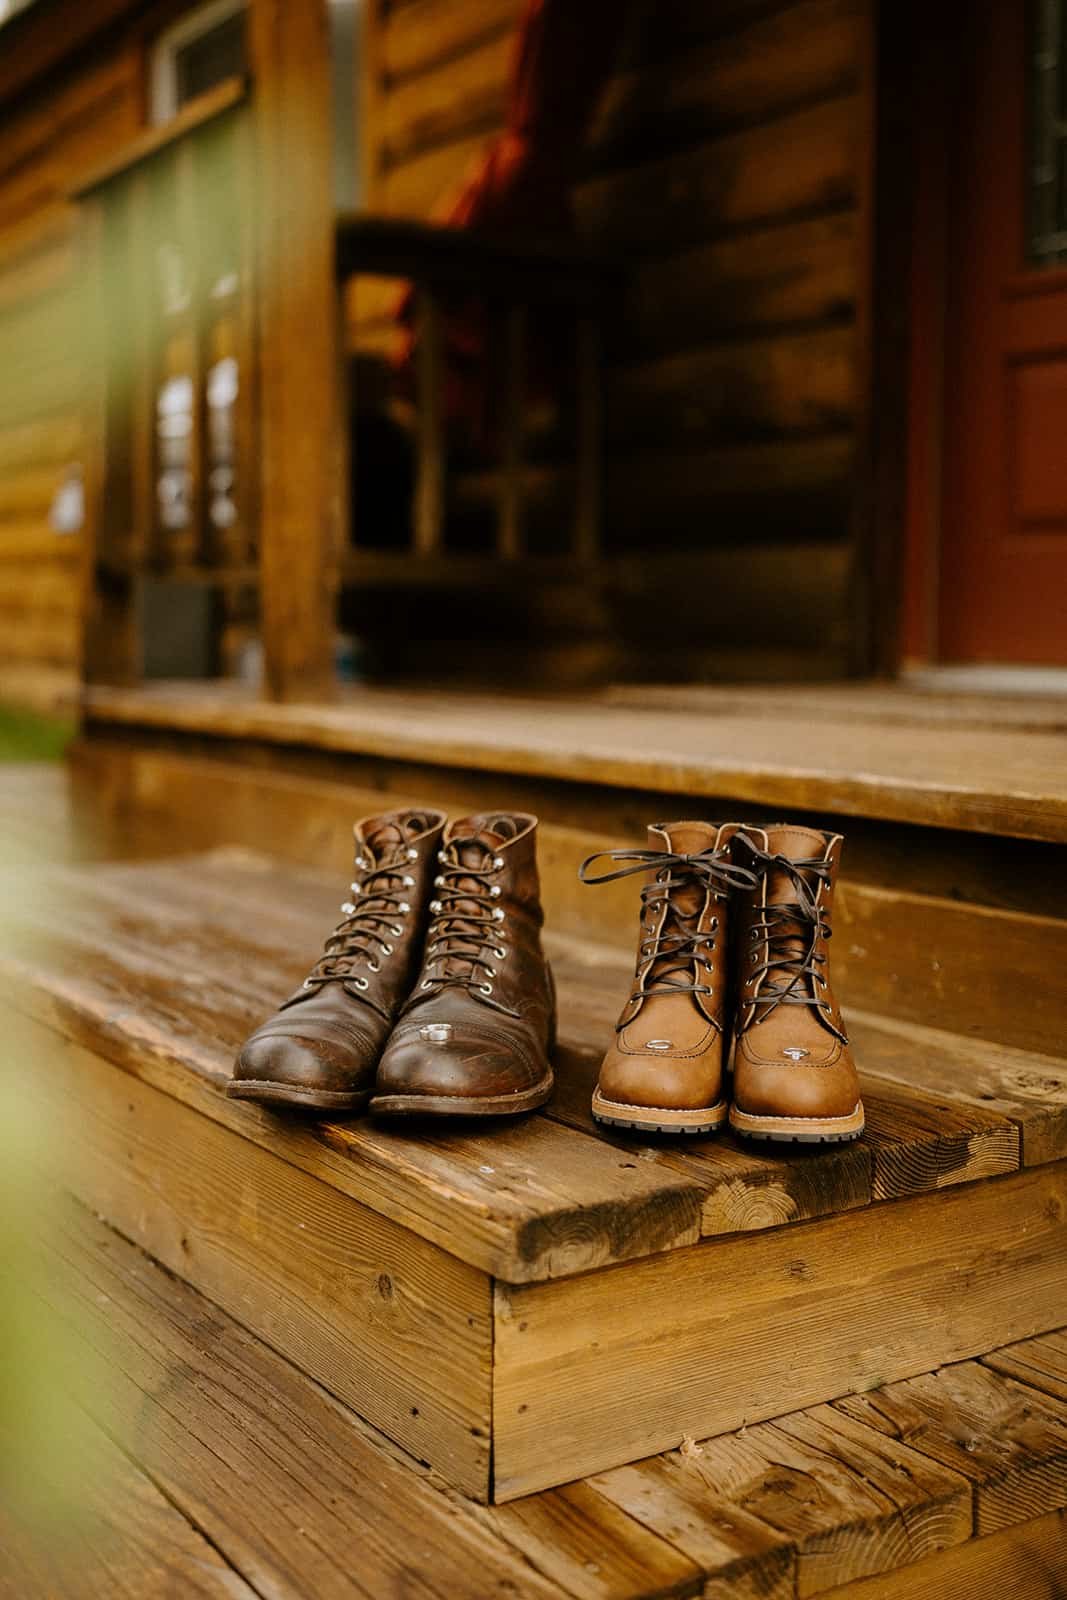 Redwing boots sitting on a wood porch step